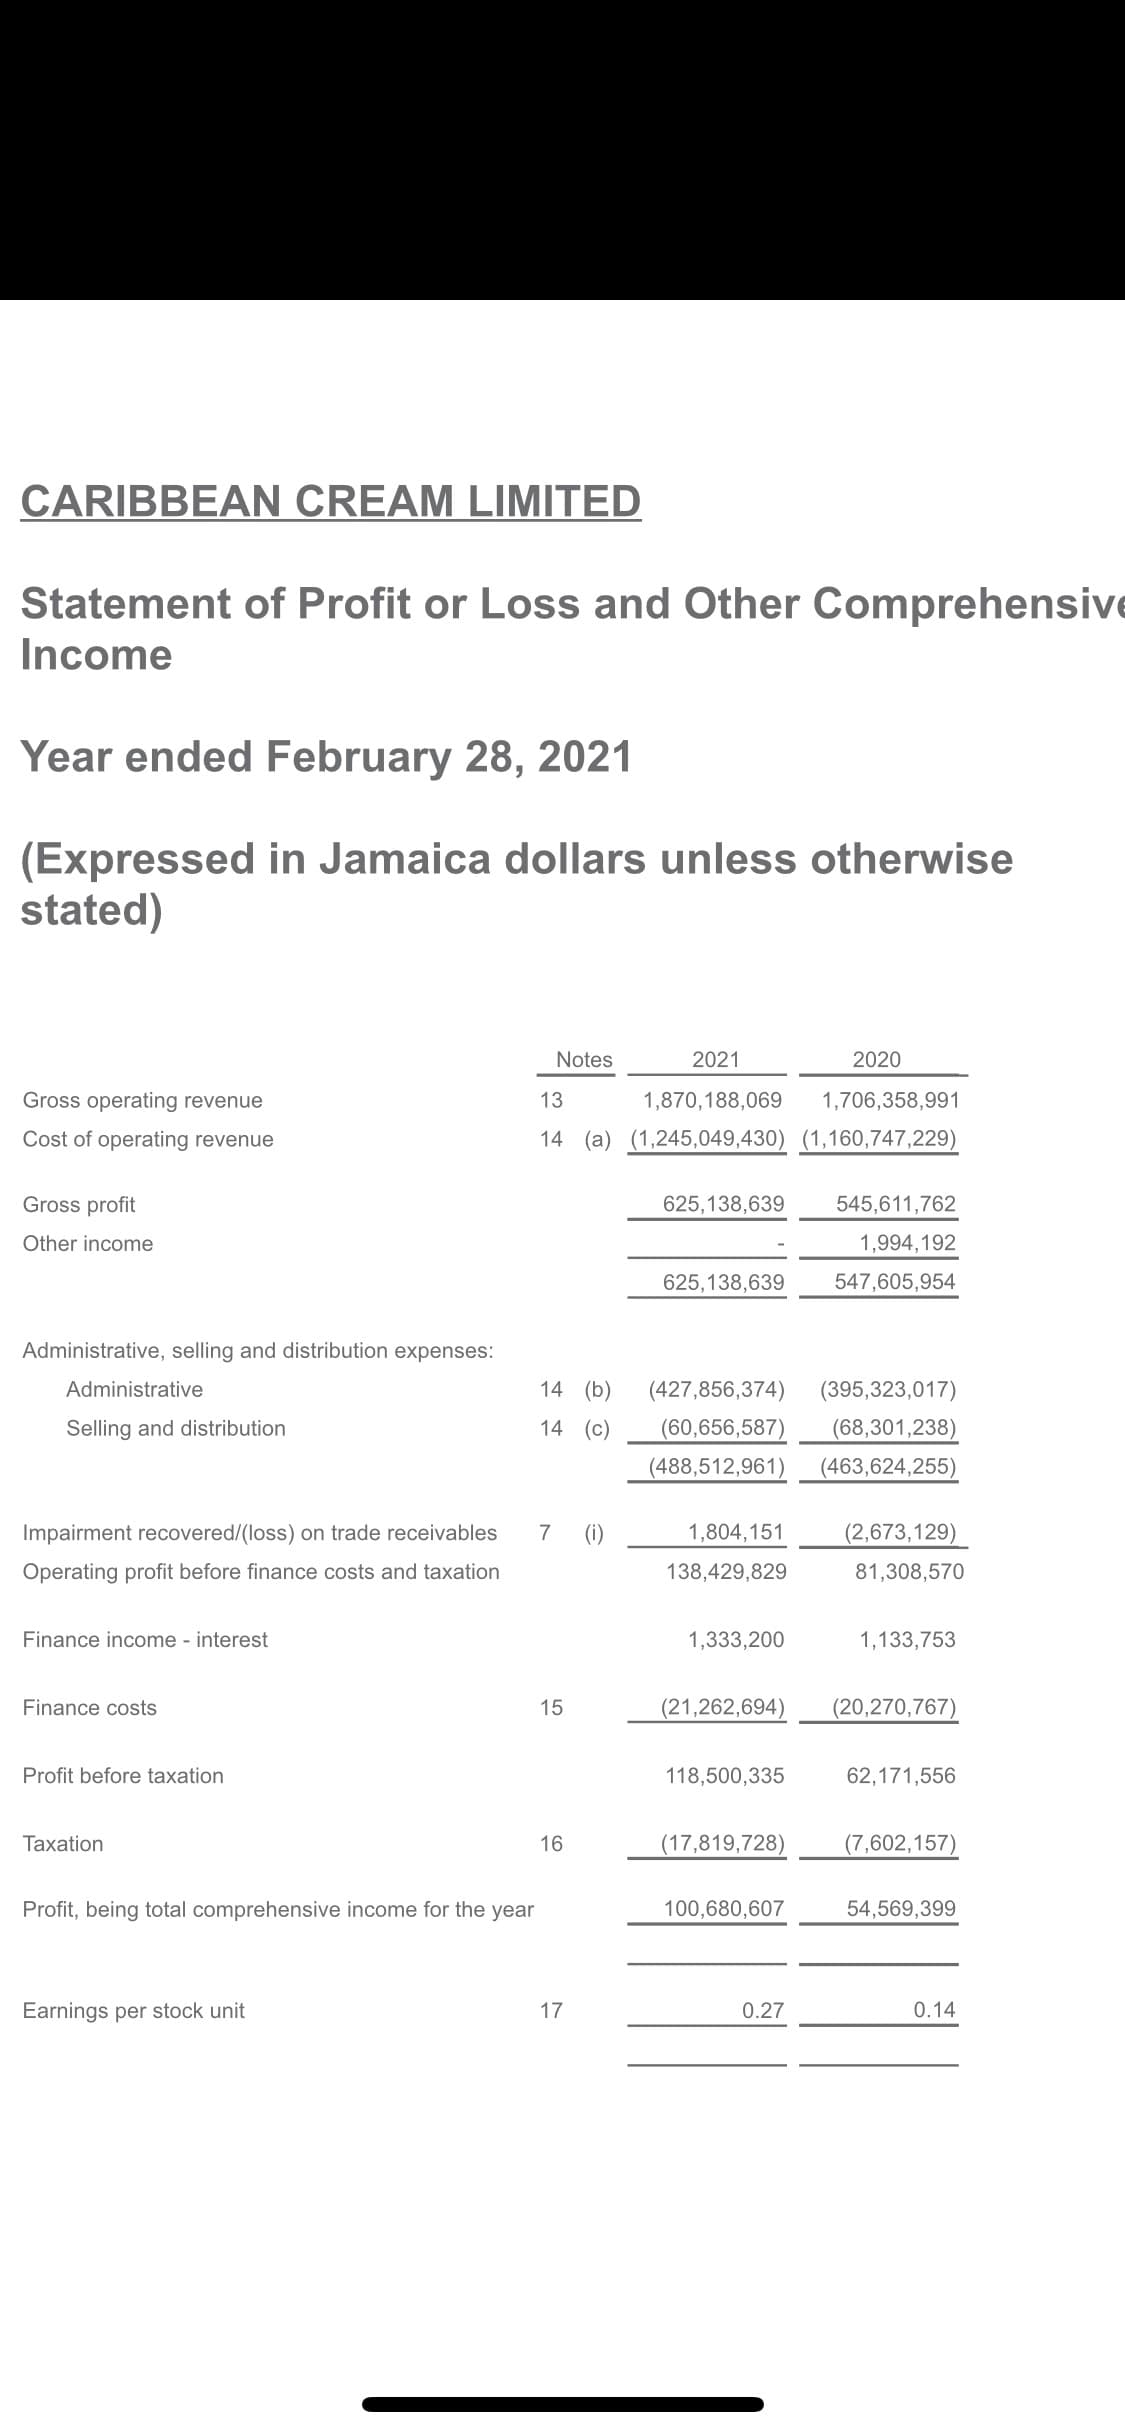 CARIBBEAN CREAM LIMITED
Statement of Profit or Loss and Other Comprehensive
Income
Year ended February 28, 2021
(Expressed in Jamaica dollars unless otherwise
stated)
Notes
2021
2020
Gross operating revenue
13
1,870,188,069
1,706,358,991
Cost of operating revenue
14 (a) (1,245,049,430) (1,160,747,229)
Gross profit
625,138,639
545,611,762
Other income
1,994,192
625,138,639
547,605,954
Administrative, selling and distribution expenses:
Administrative
14 (b)
(427,856,374)
(395,323,017)
Selling and distribution
14 (c)
(60,656,587)
(68,301,238)
(488,512,961)
(463,624,255)
Impairment recovered/(loss) on trade receivables
7
(i)
1,804,151
(2,673,129)
Operating profit before finance costs and taxation
138,429,829
81,308,570
Finance income - interest
1,333,200
1,133,753
Finance costs
15
(21,262,694)
(20,270,767)
Profit before taxation
118,500,335
62,171,556
Taxation
16
(17,819,728)
(7,602,157)
Profit, being total comprehensive income for the year
100,680,607
54,569,399
Earnings per stock unit
17
0.27
0.14
